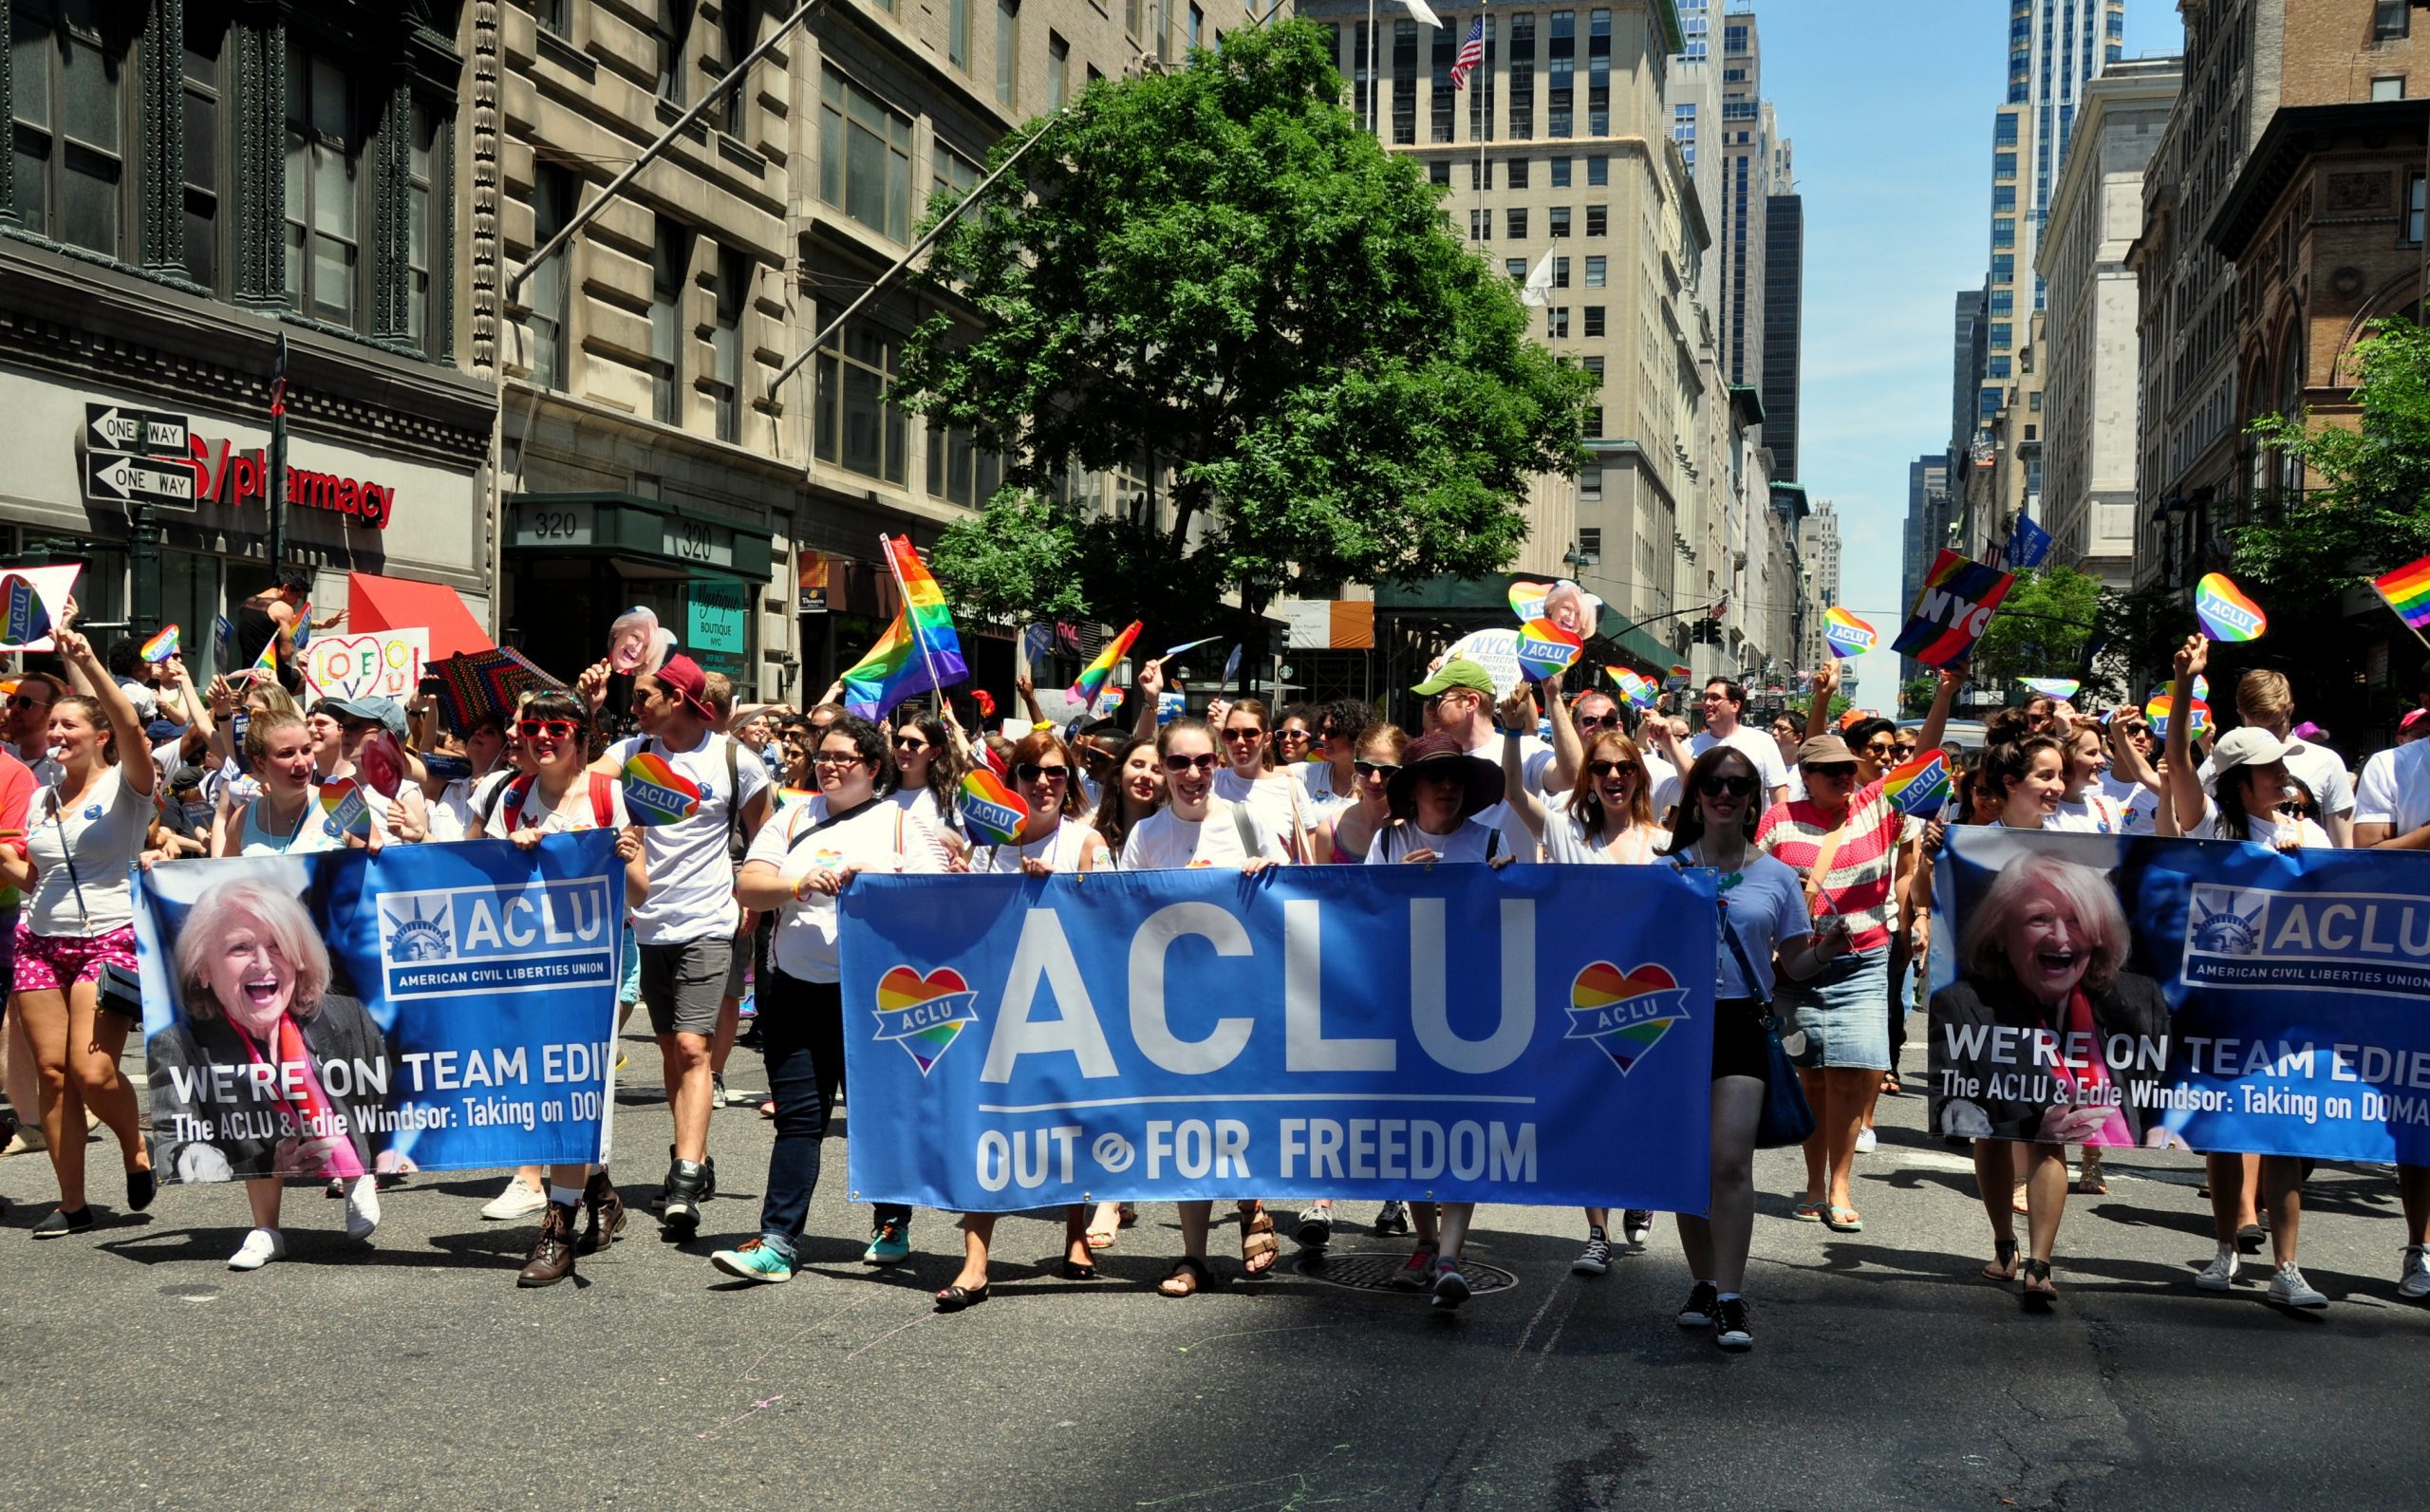 Nyc,-,June,29,,2014:,Aclu,Contingent,Marching,In,The